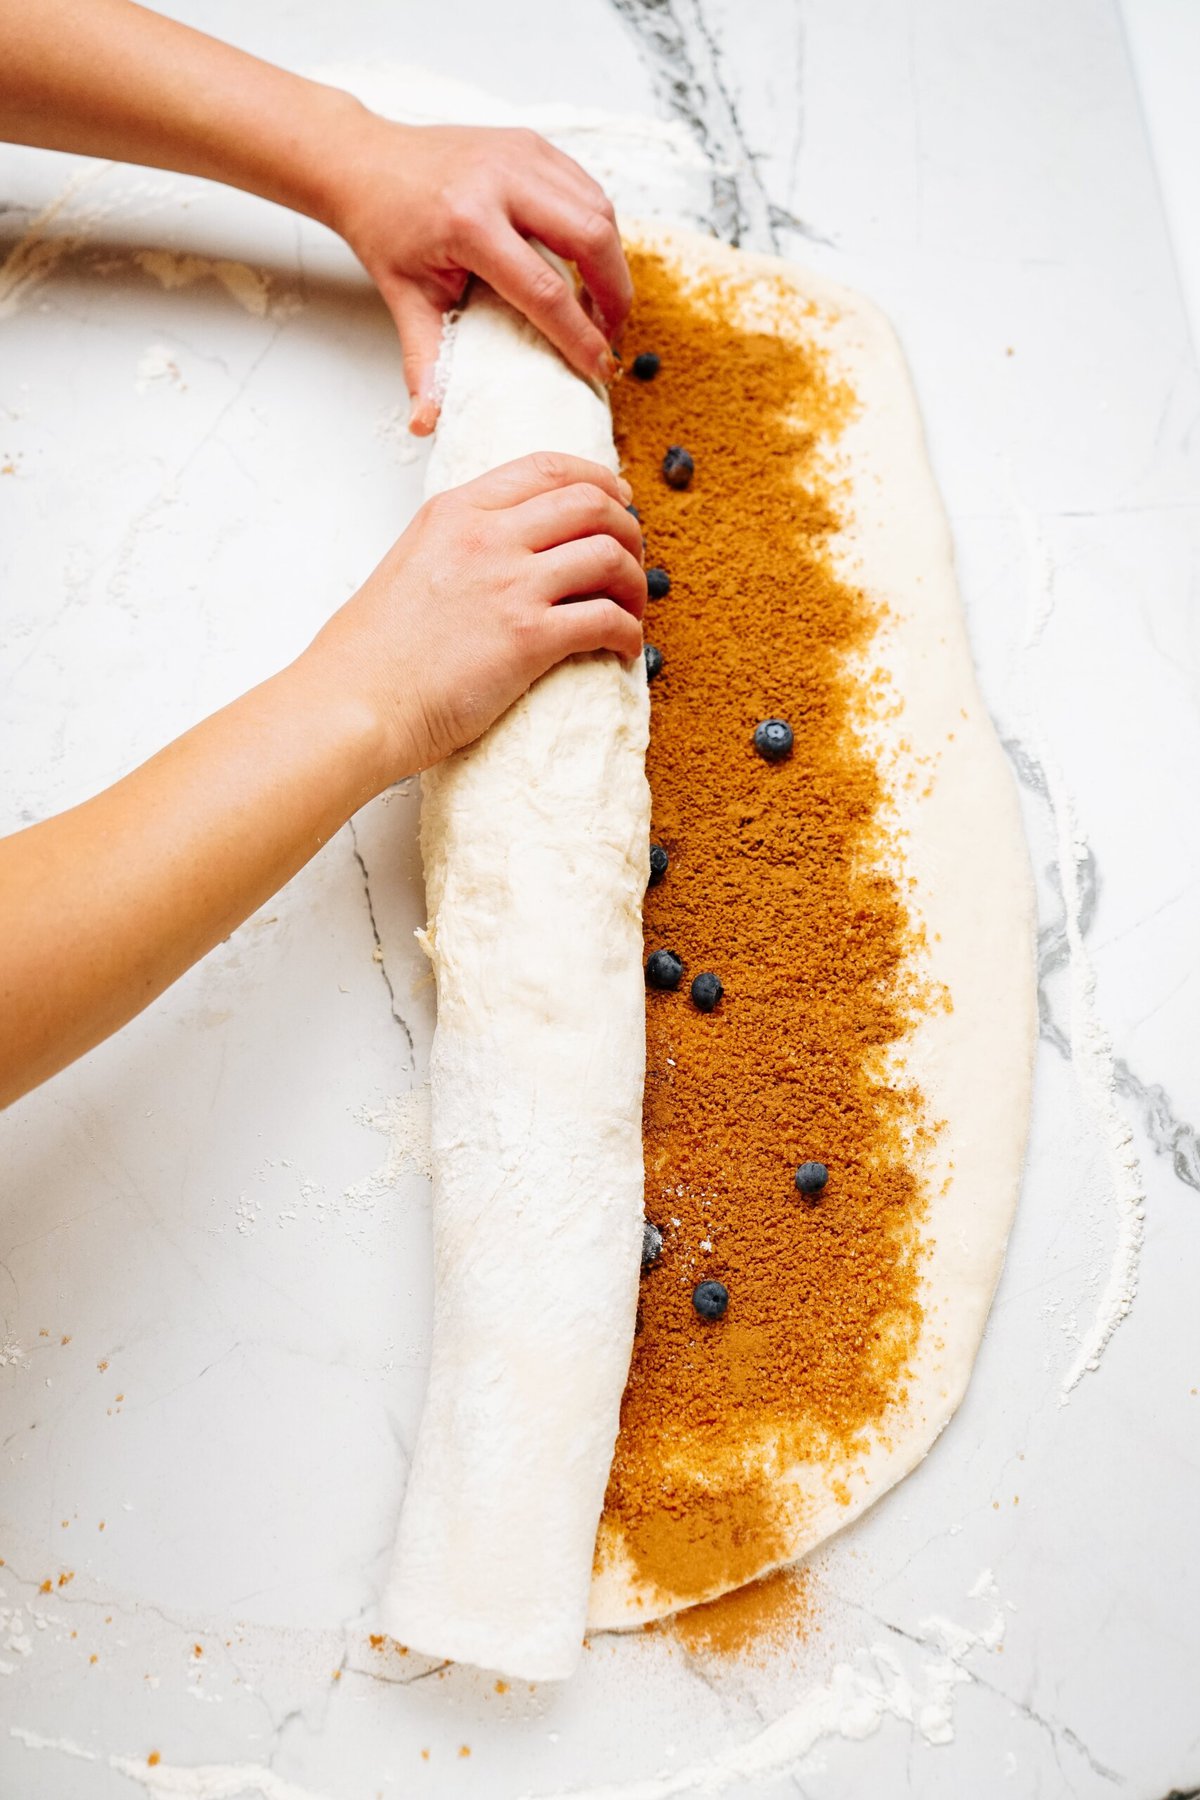 Person rolling dough with cinnamon filling and blueberries on a white marble surface, preparing delicious cinnamon rolls.